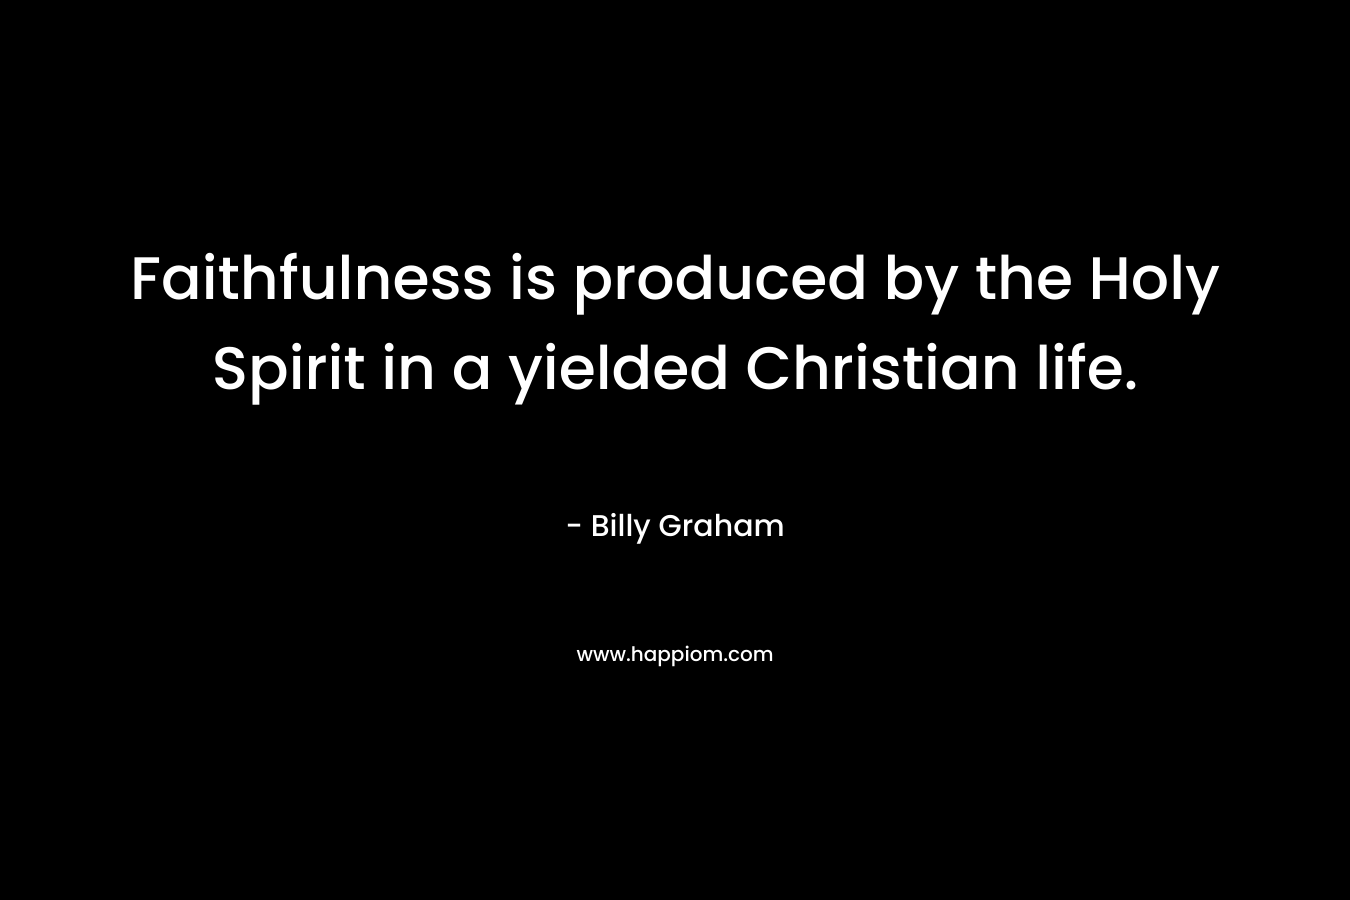 Faithfulness is produced by the Holy Spirit in a yielded Christian life. – Billy Graham